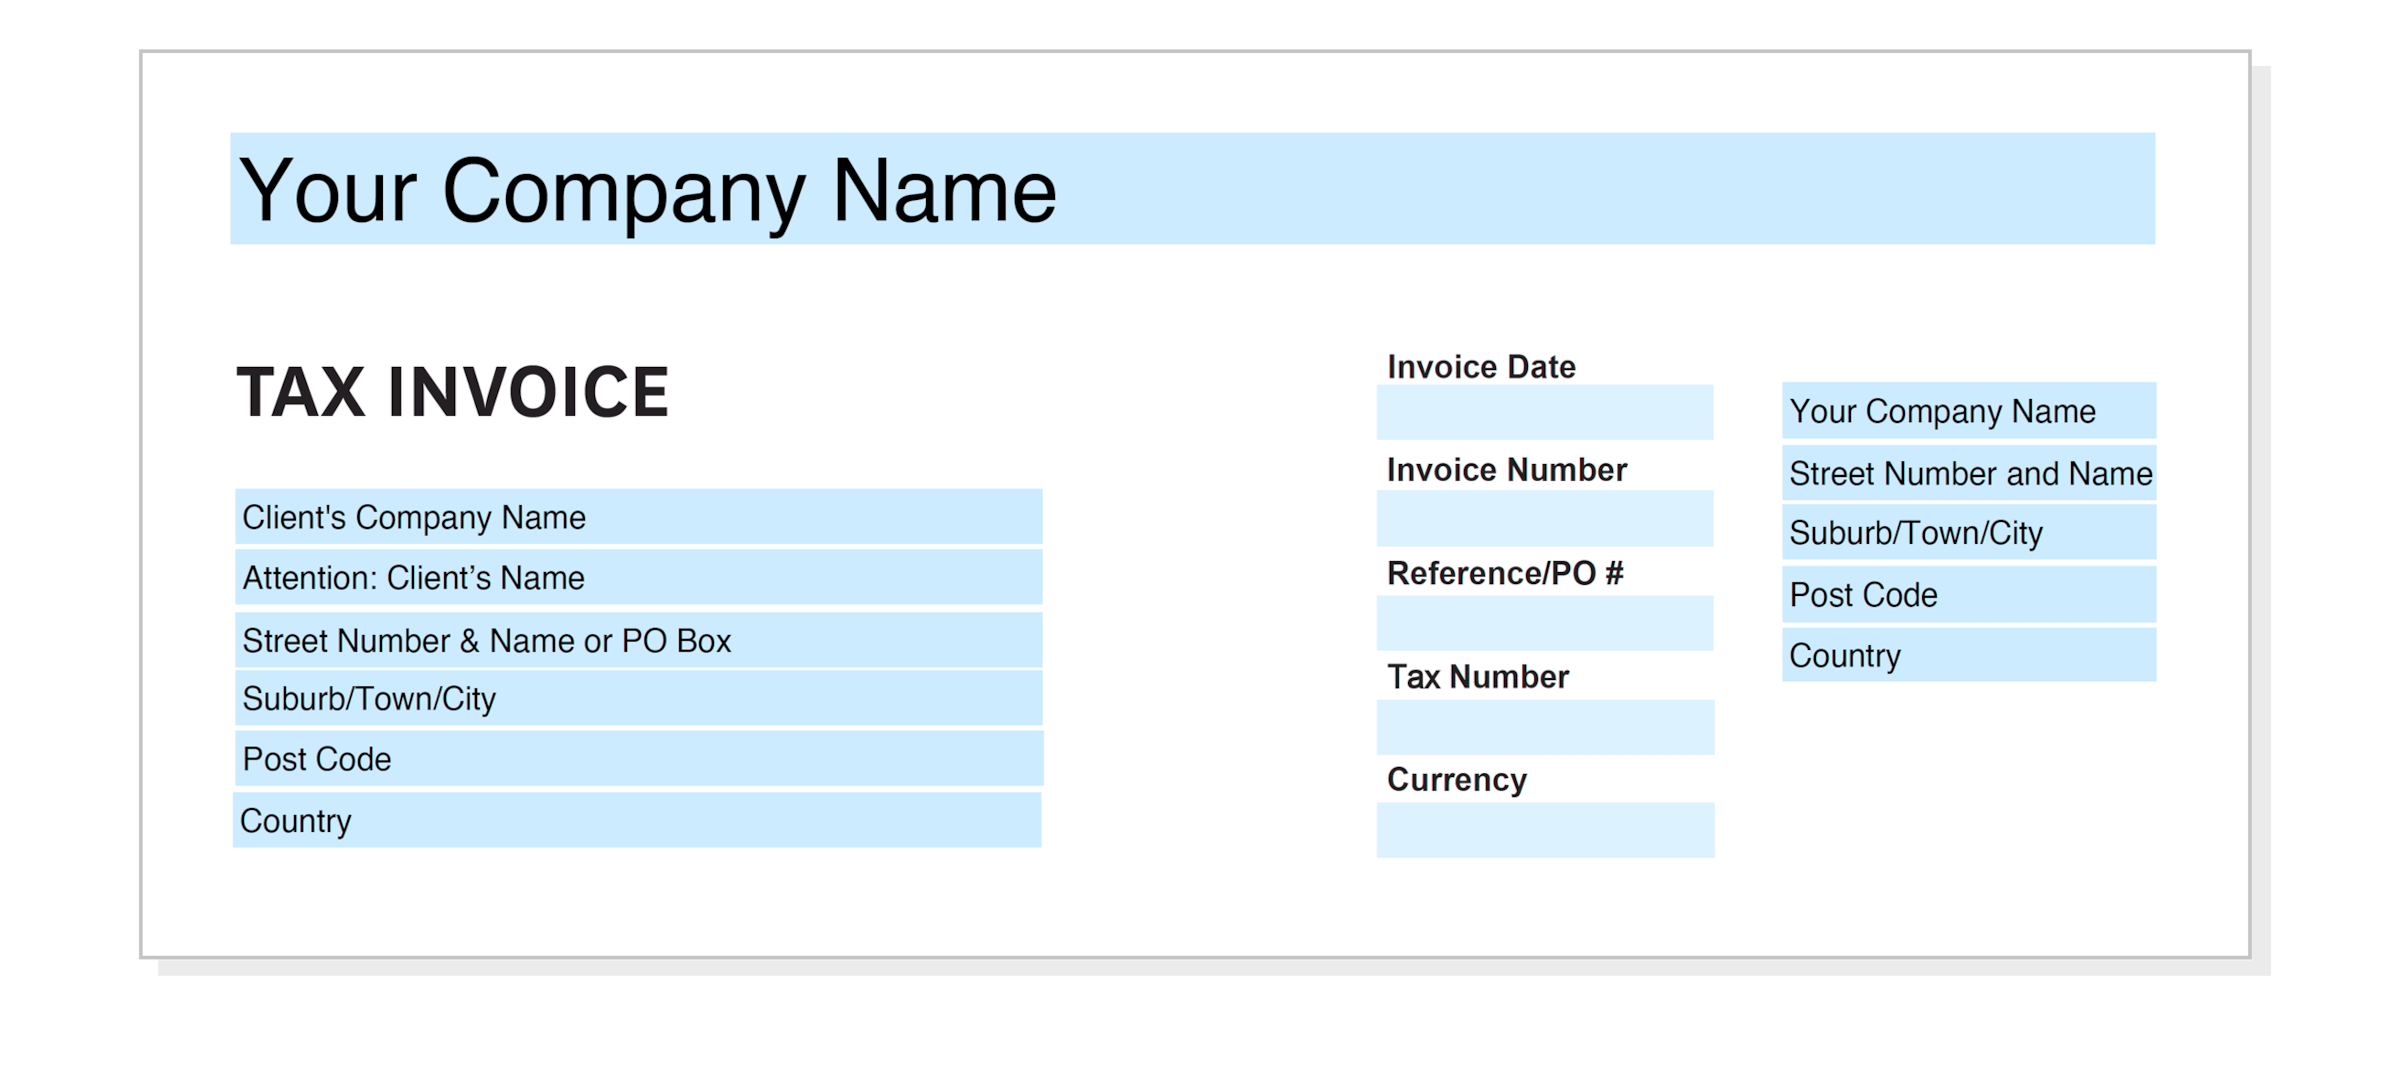 Top section of an invoice where supplier and customer’s details are entered.